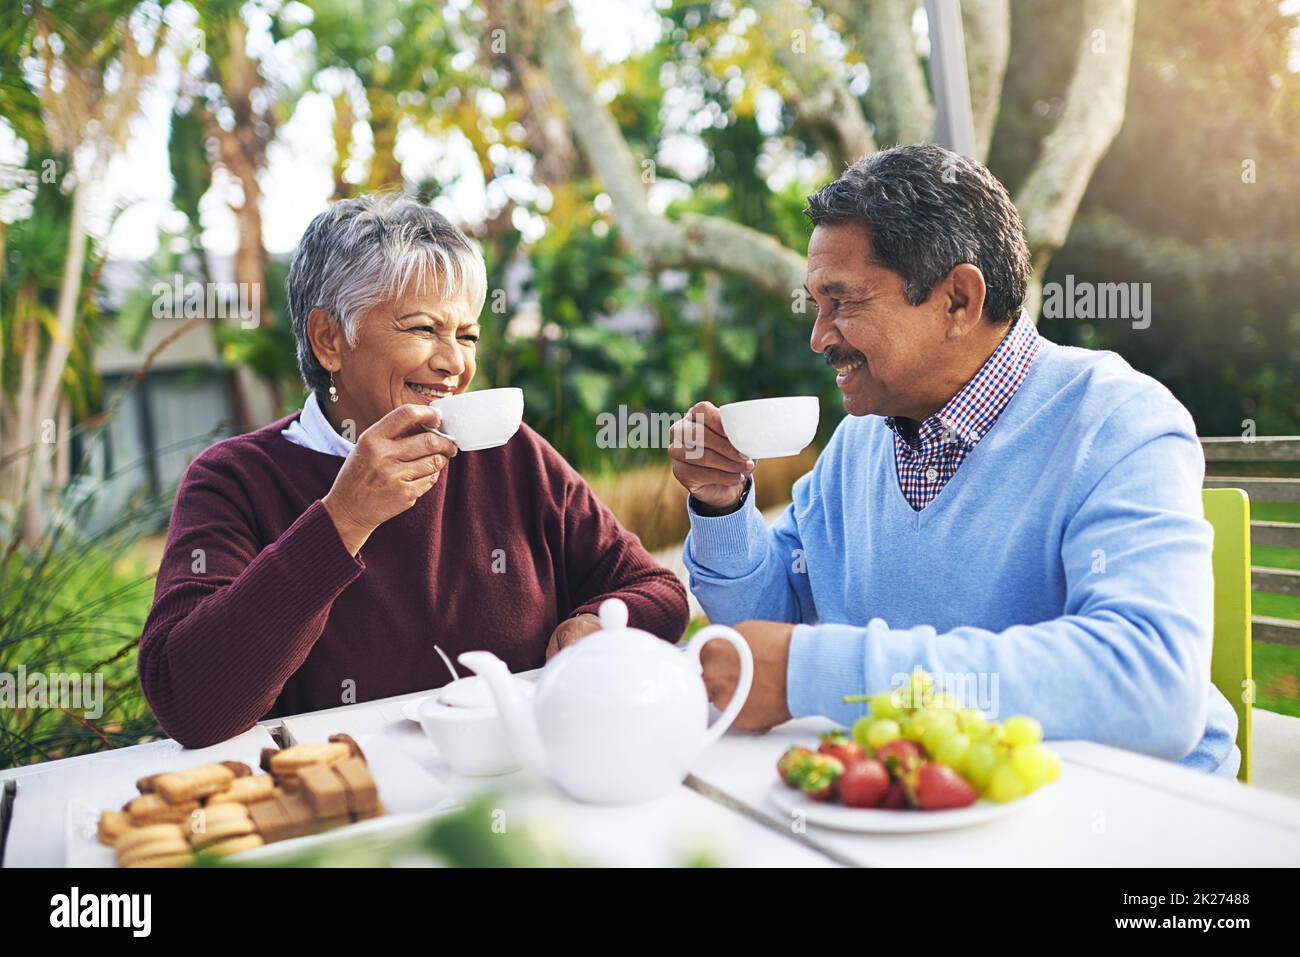 Retirement done right. Shot of a happy older couple having tea together outdoors. Stock Photo